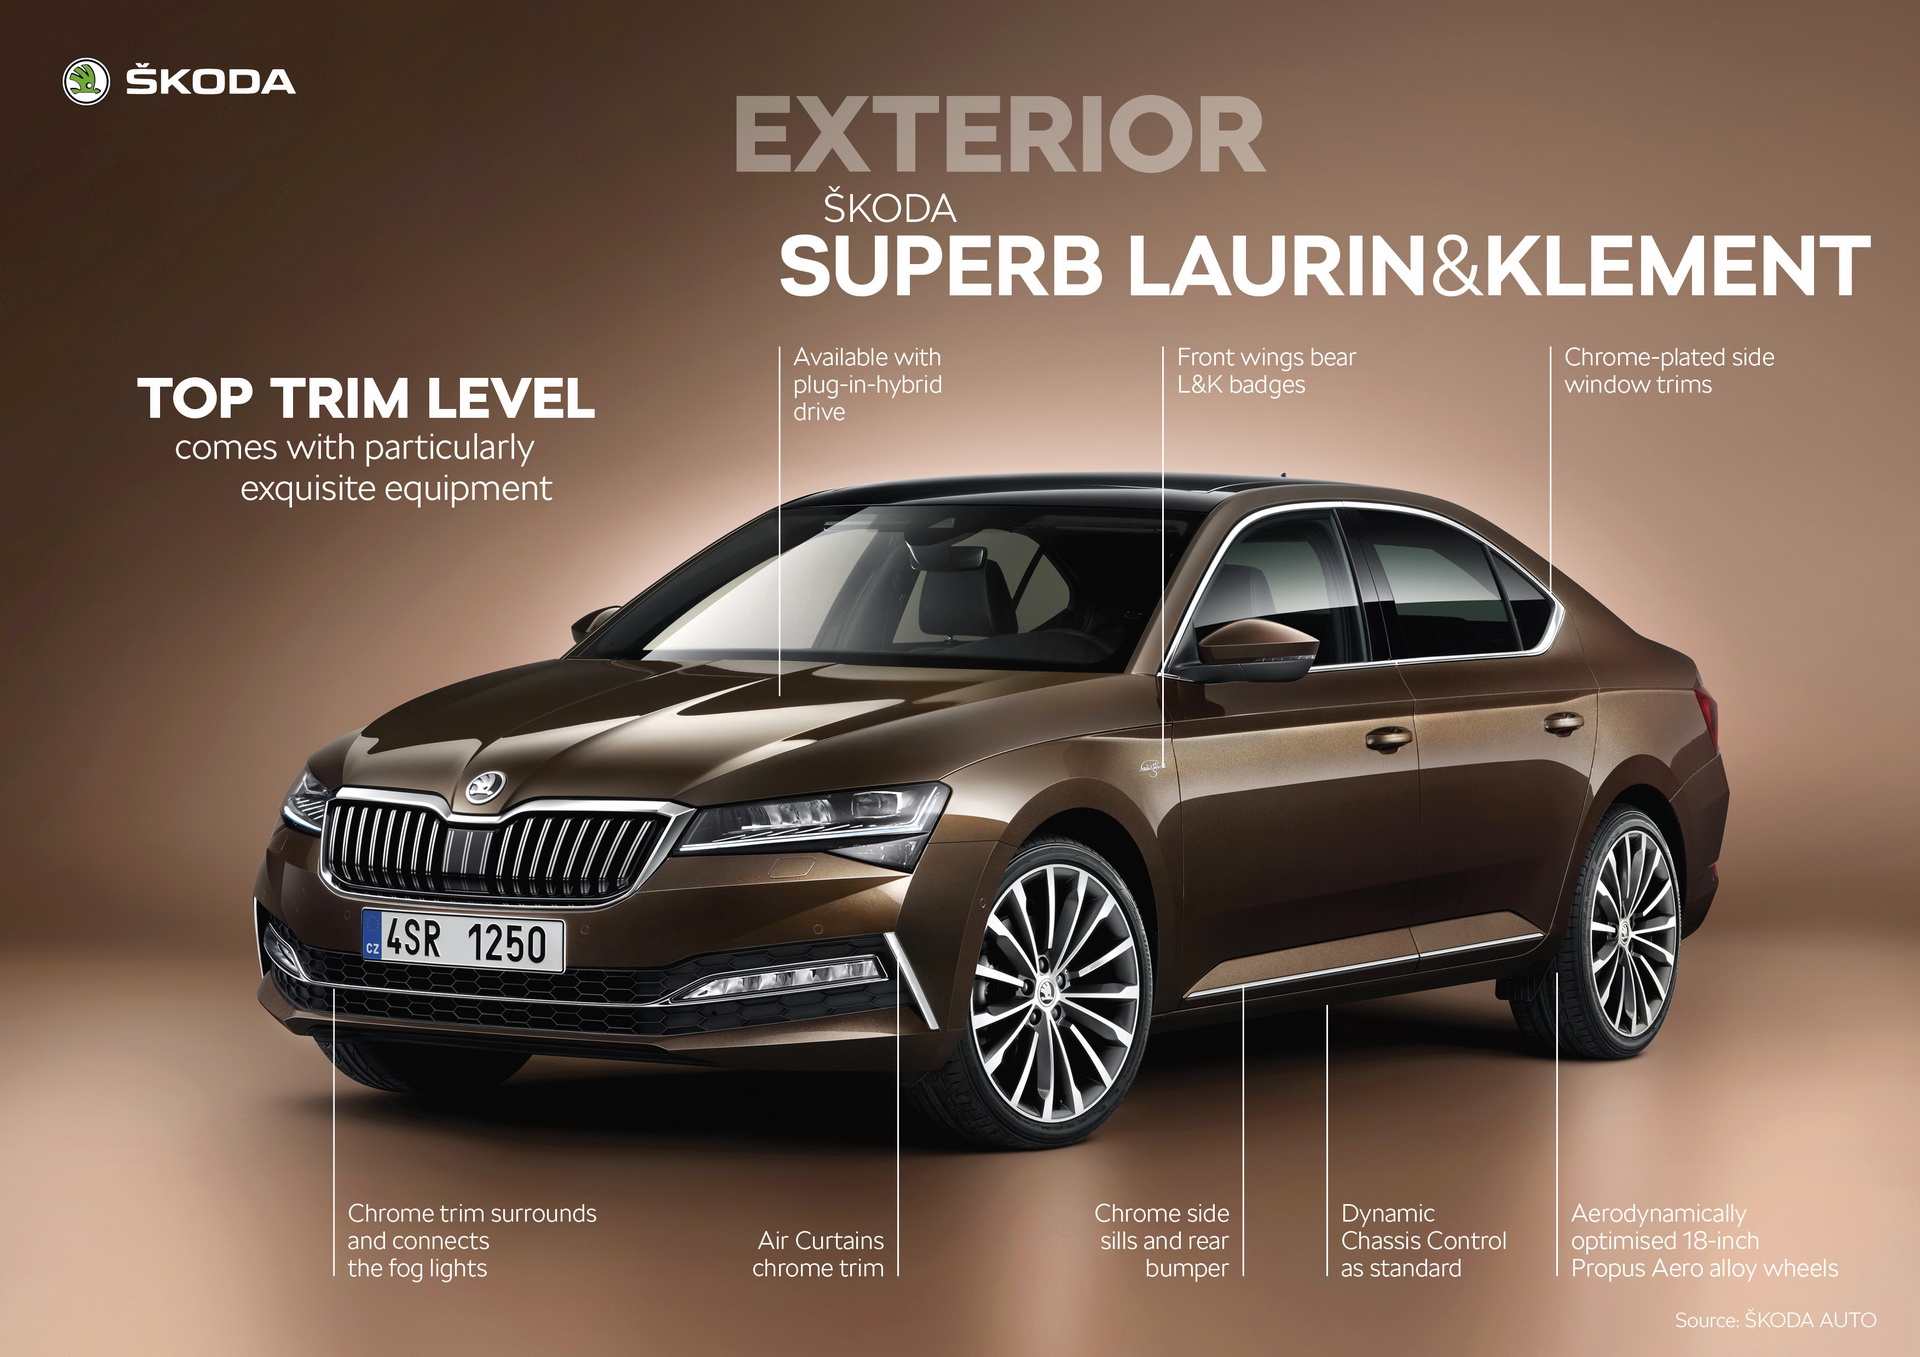 Skoda Superb Priced From £24,655 In The UK, PHEV To Launch Next Year |